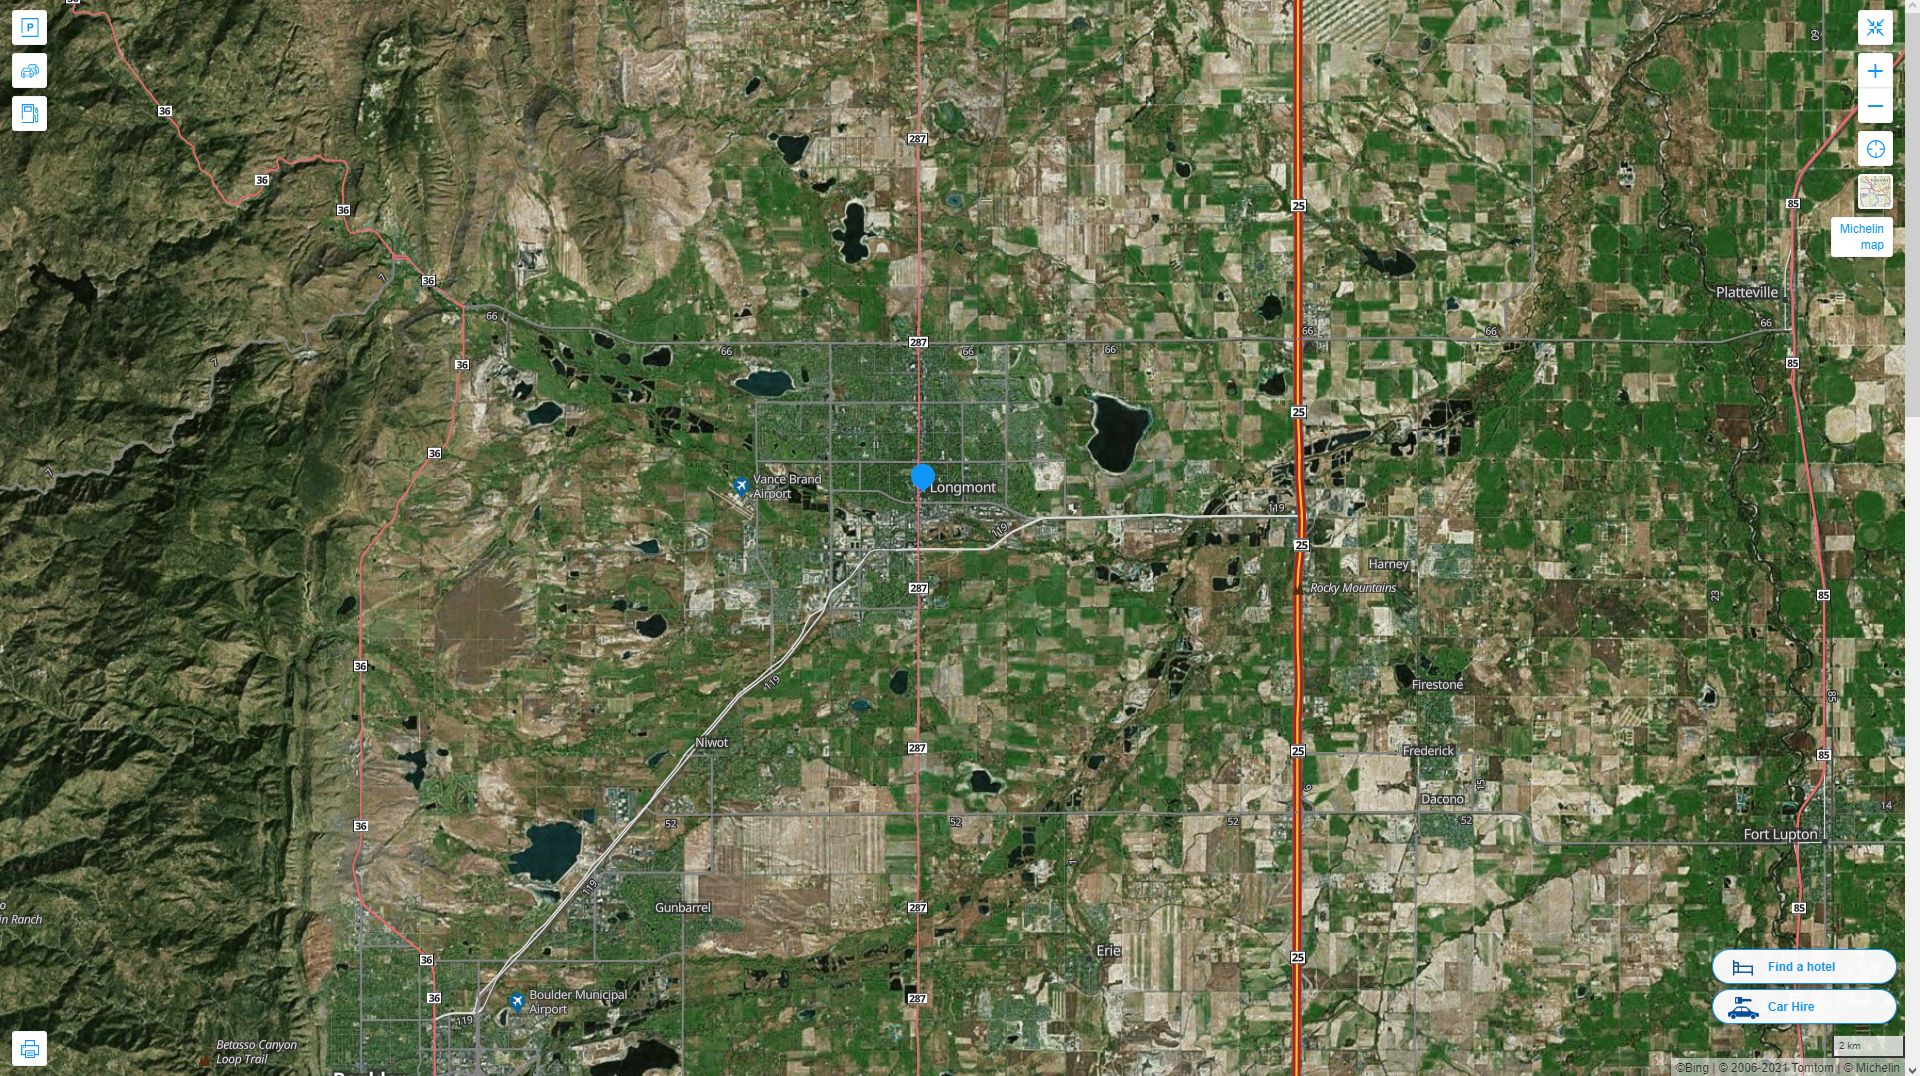 Longmont Colorado Highway and Road Map with Satellite View